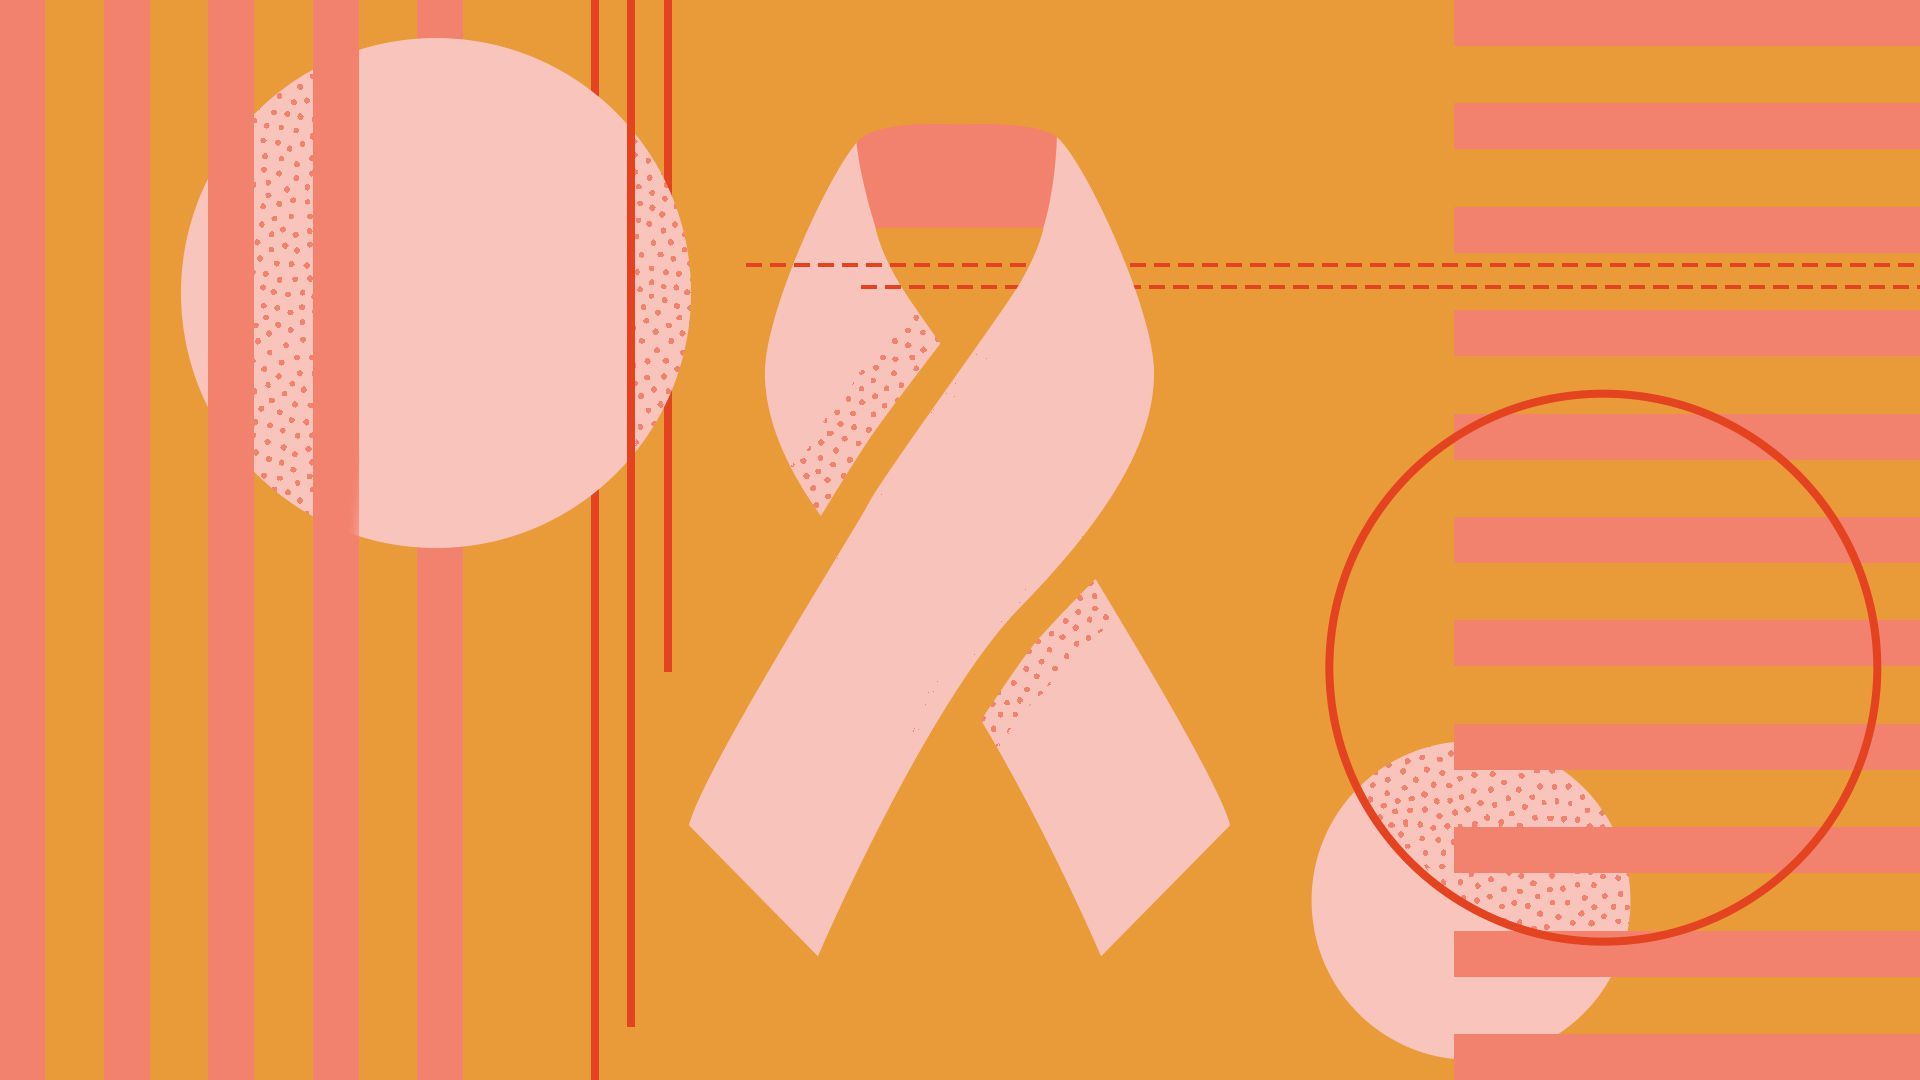 Abstract cancer ribbon surrounded by shapes and lines.